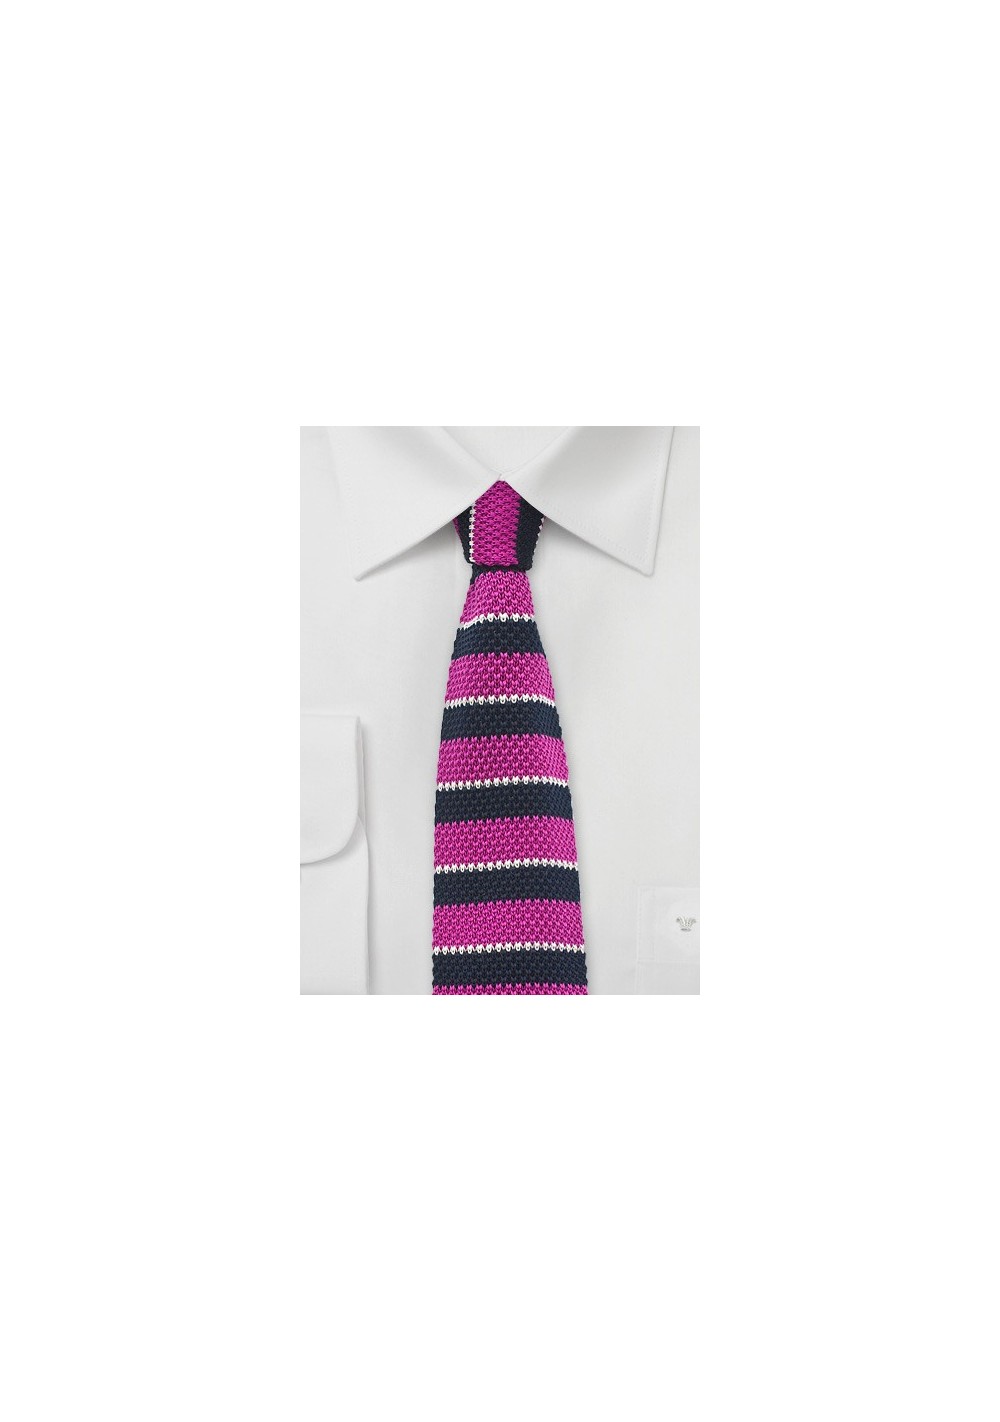 Striped Knitted Tie in Magenta and Navy